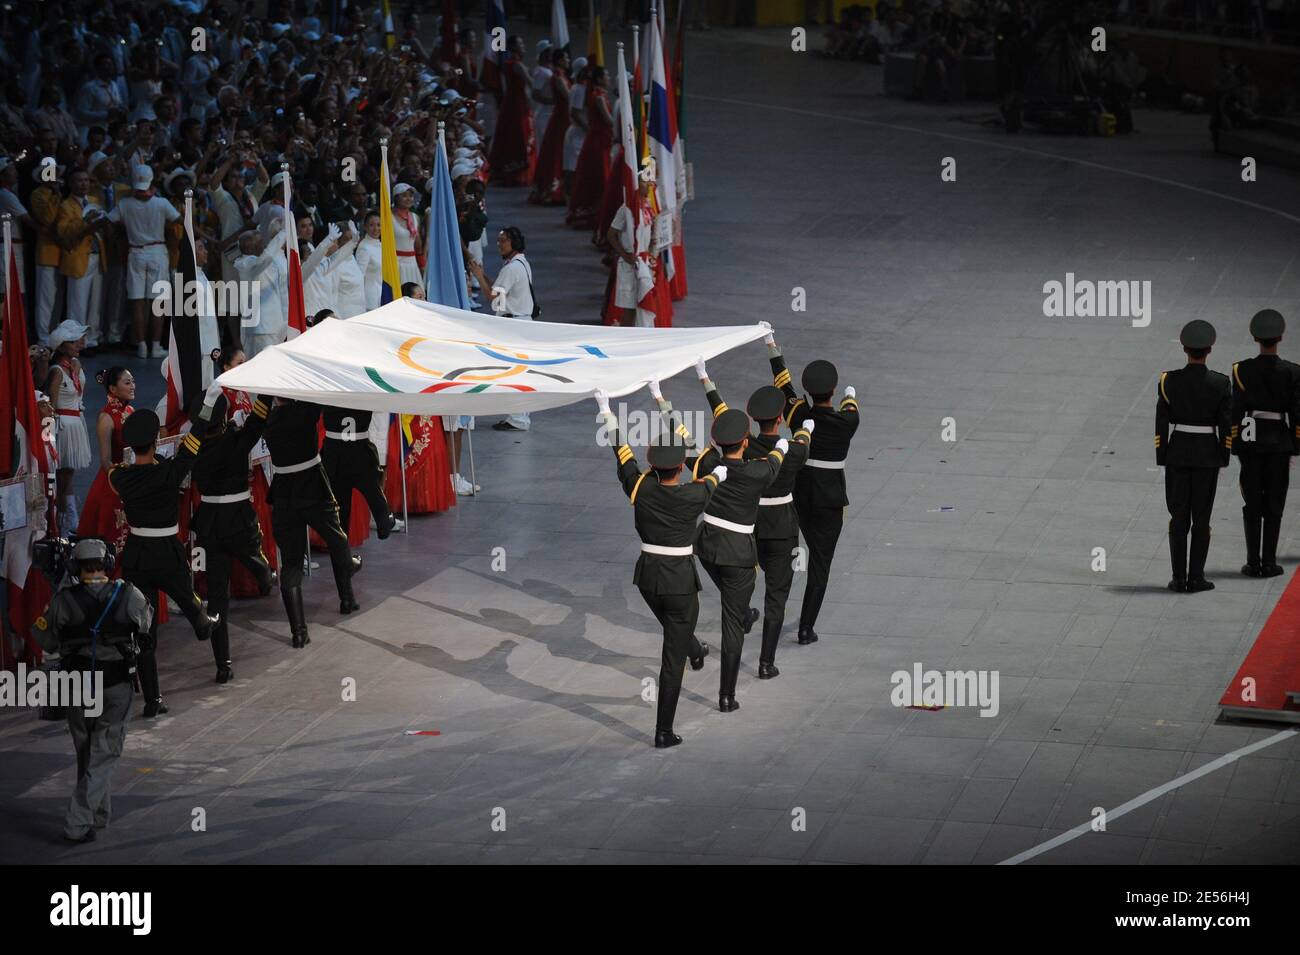 Members of the Chinese military raise the Olympic flag next the China flag during the Opening Ceremony for the 2008 Beijing Summer Olympics at the National Stadium Stock Photo